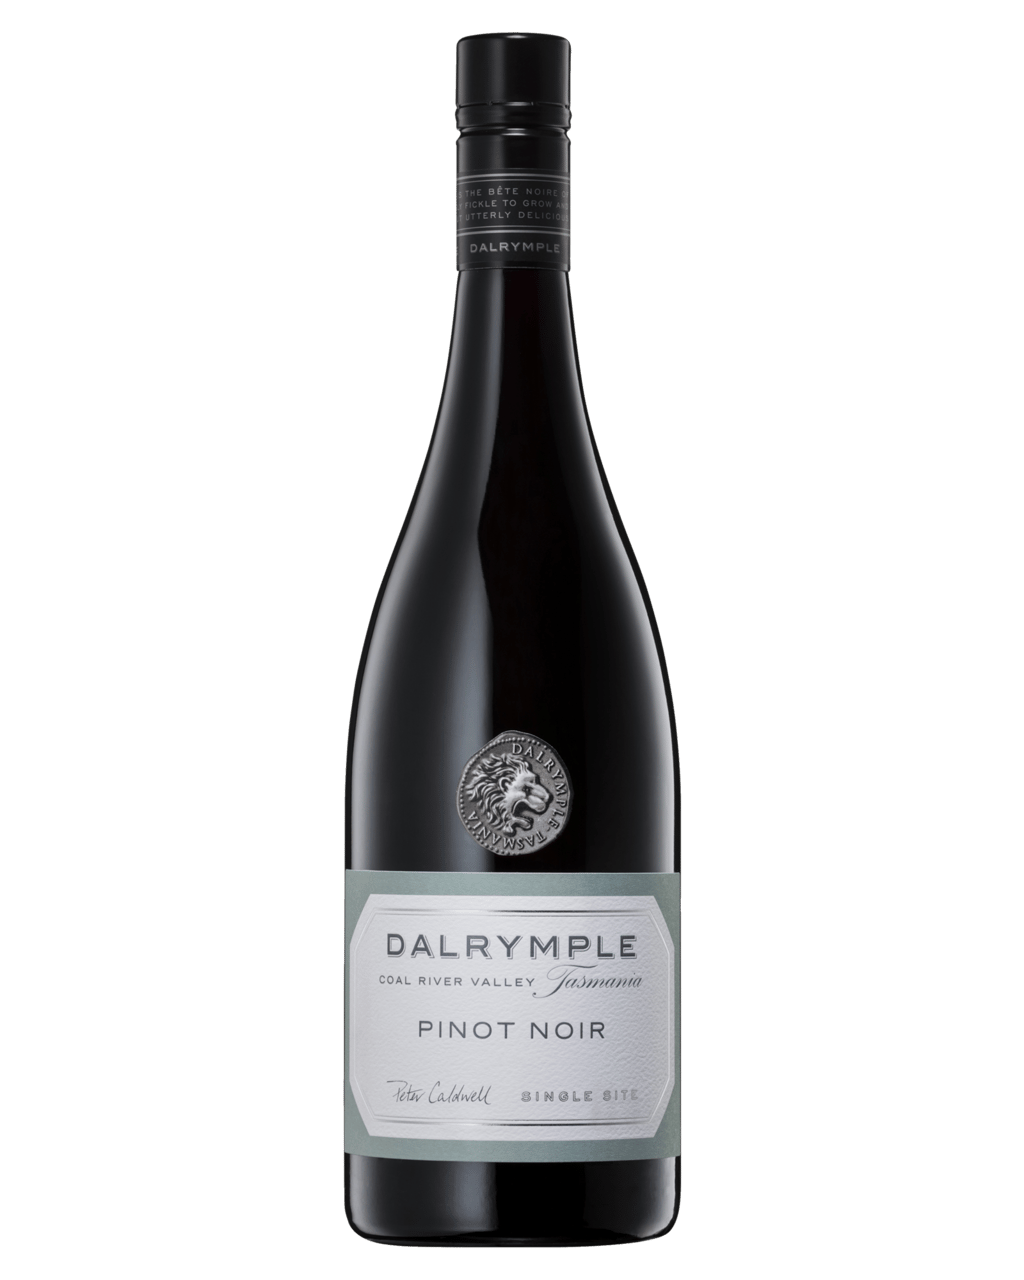 Buy Dalrymple Coal River Valley Pinot Noir Online (Lowest Price ...